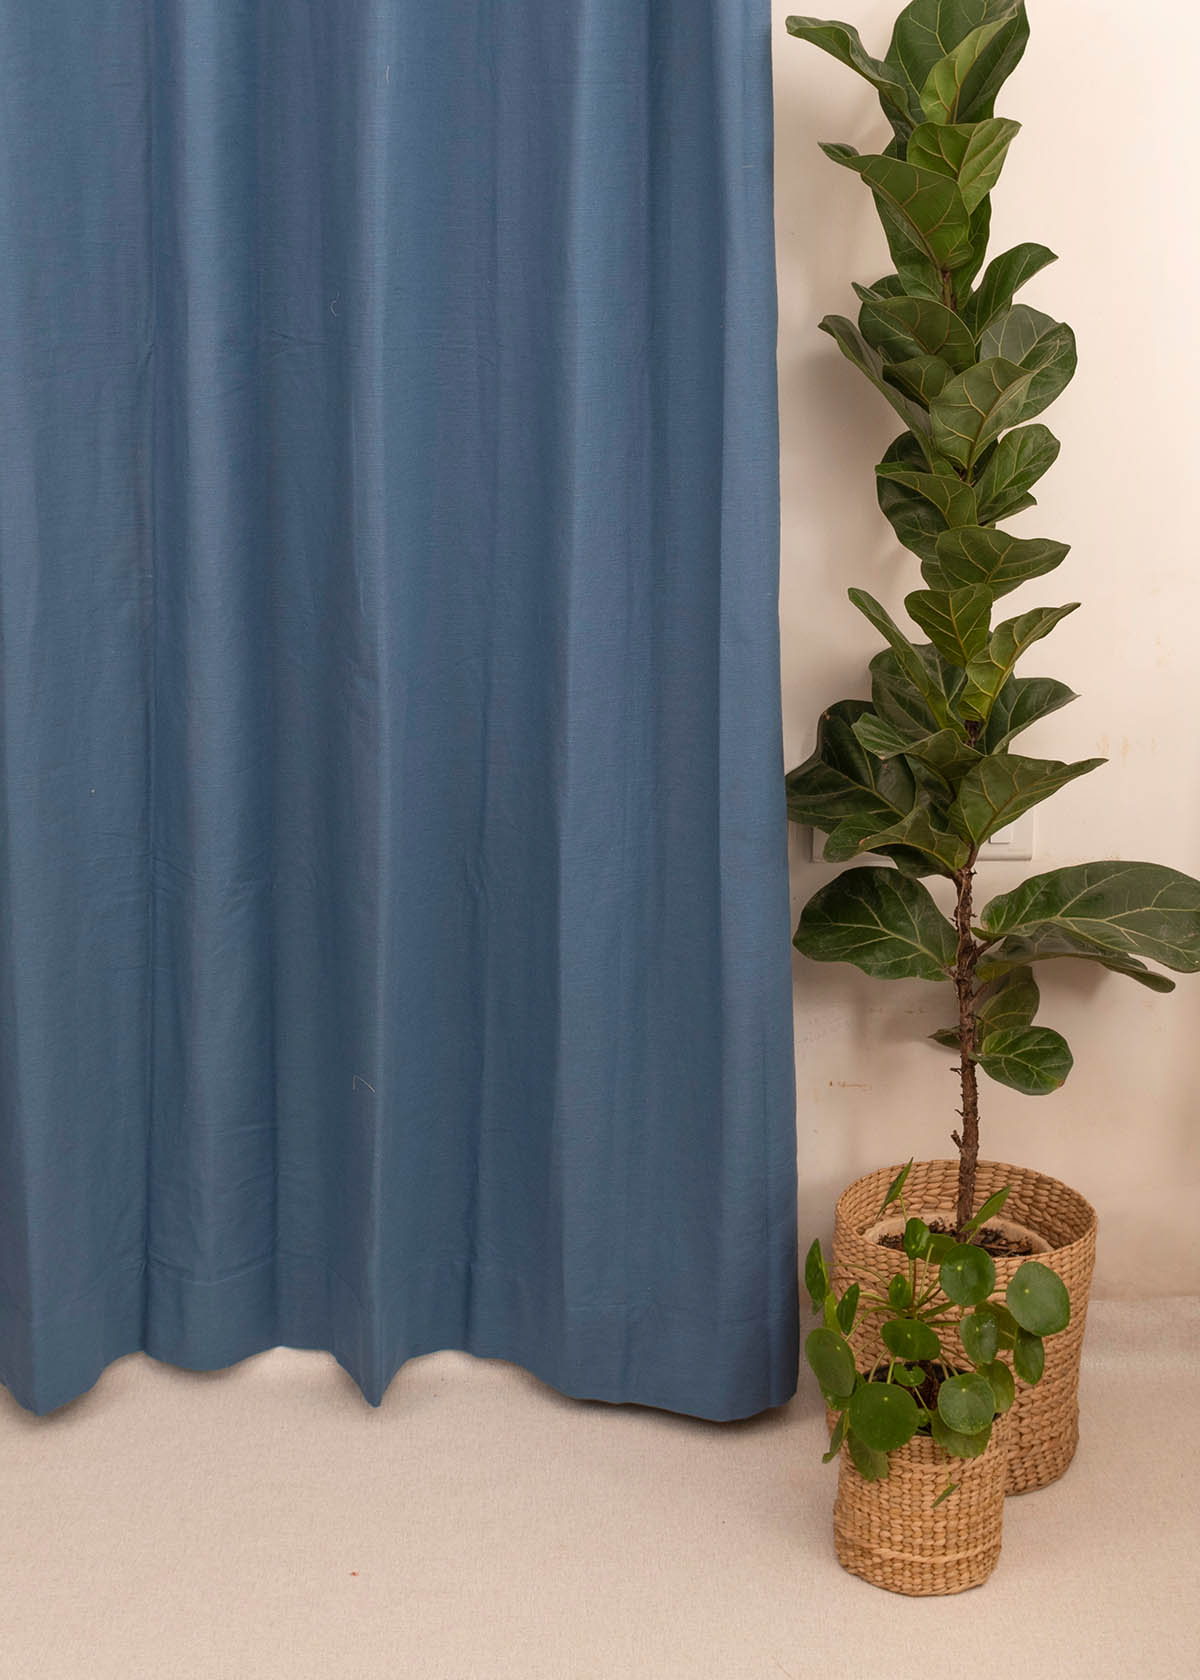 Solid  Royal blue 100% cotton plain curtain for bedroom - Room darkening - Pack of 1